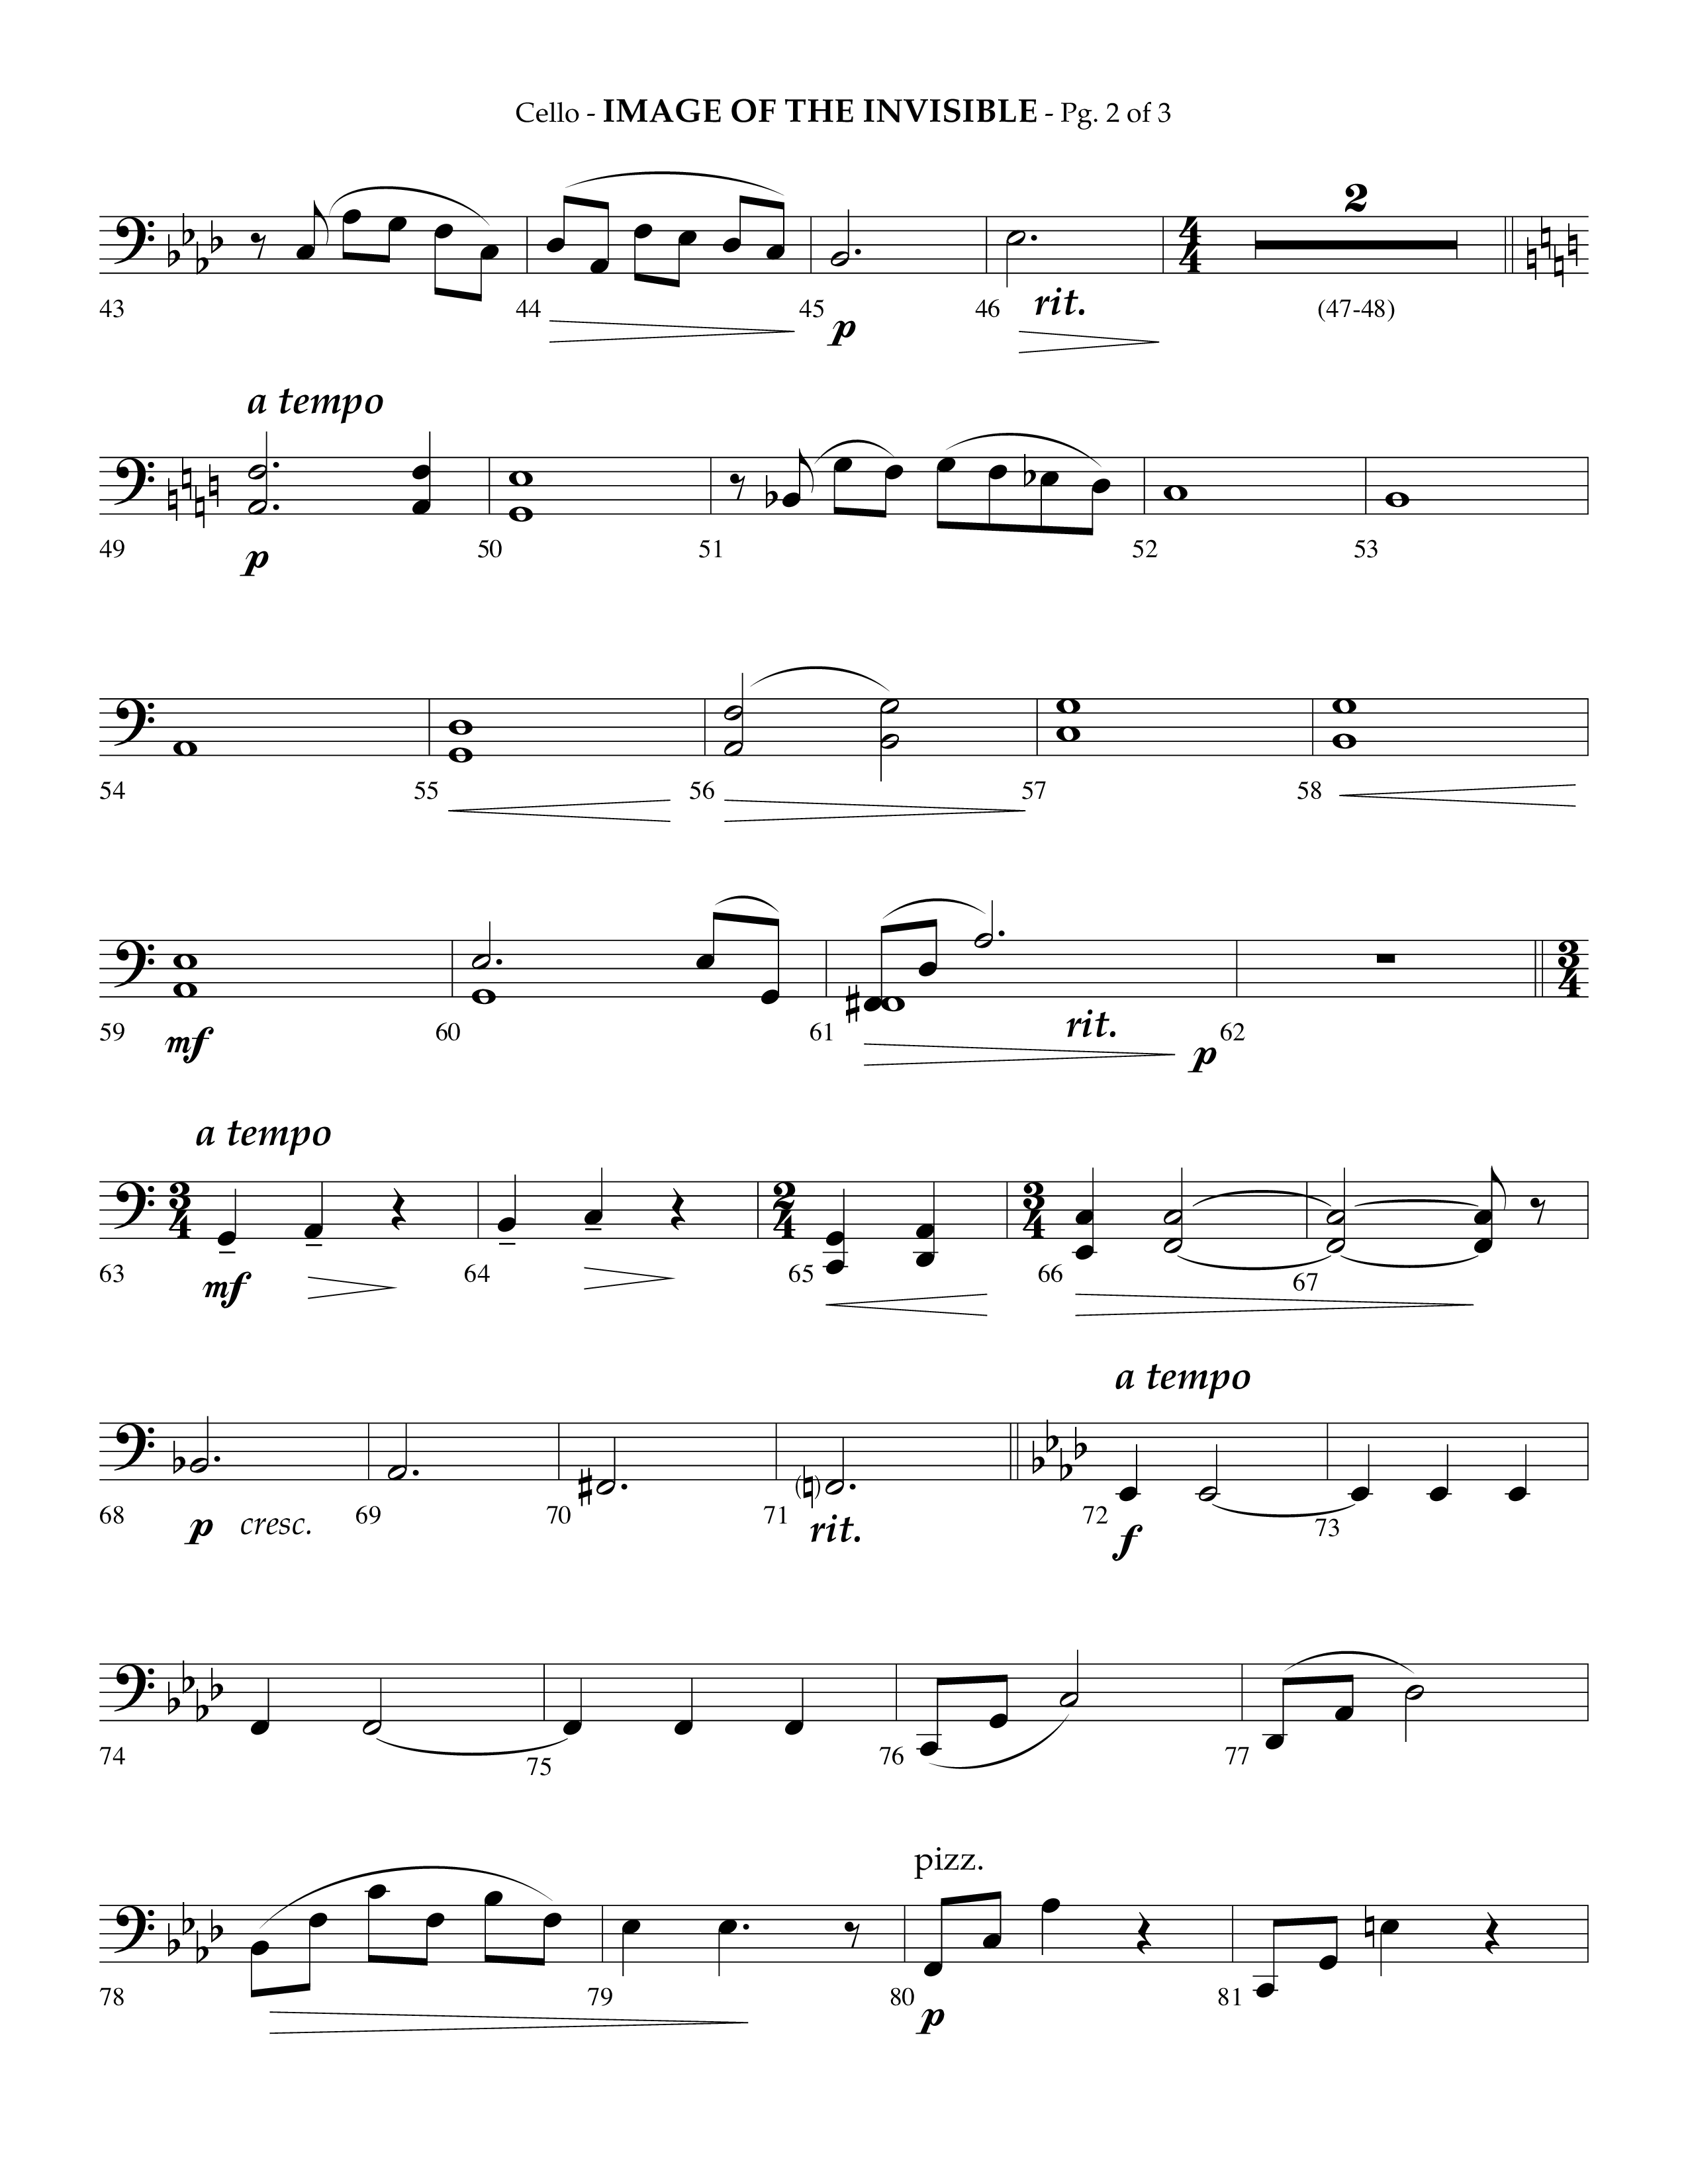 Image Of The Invisible (Choral Anthem SATB) Cello (Lifeway Choral / Arr. Phillip Keveren)